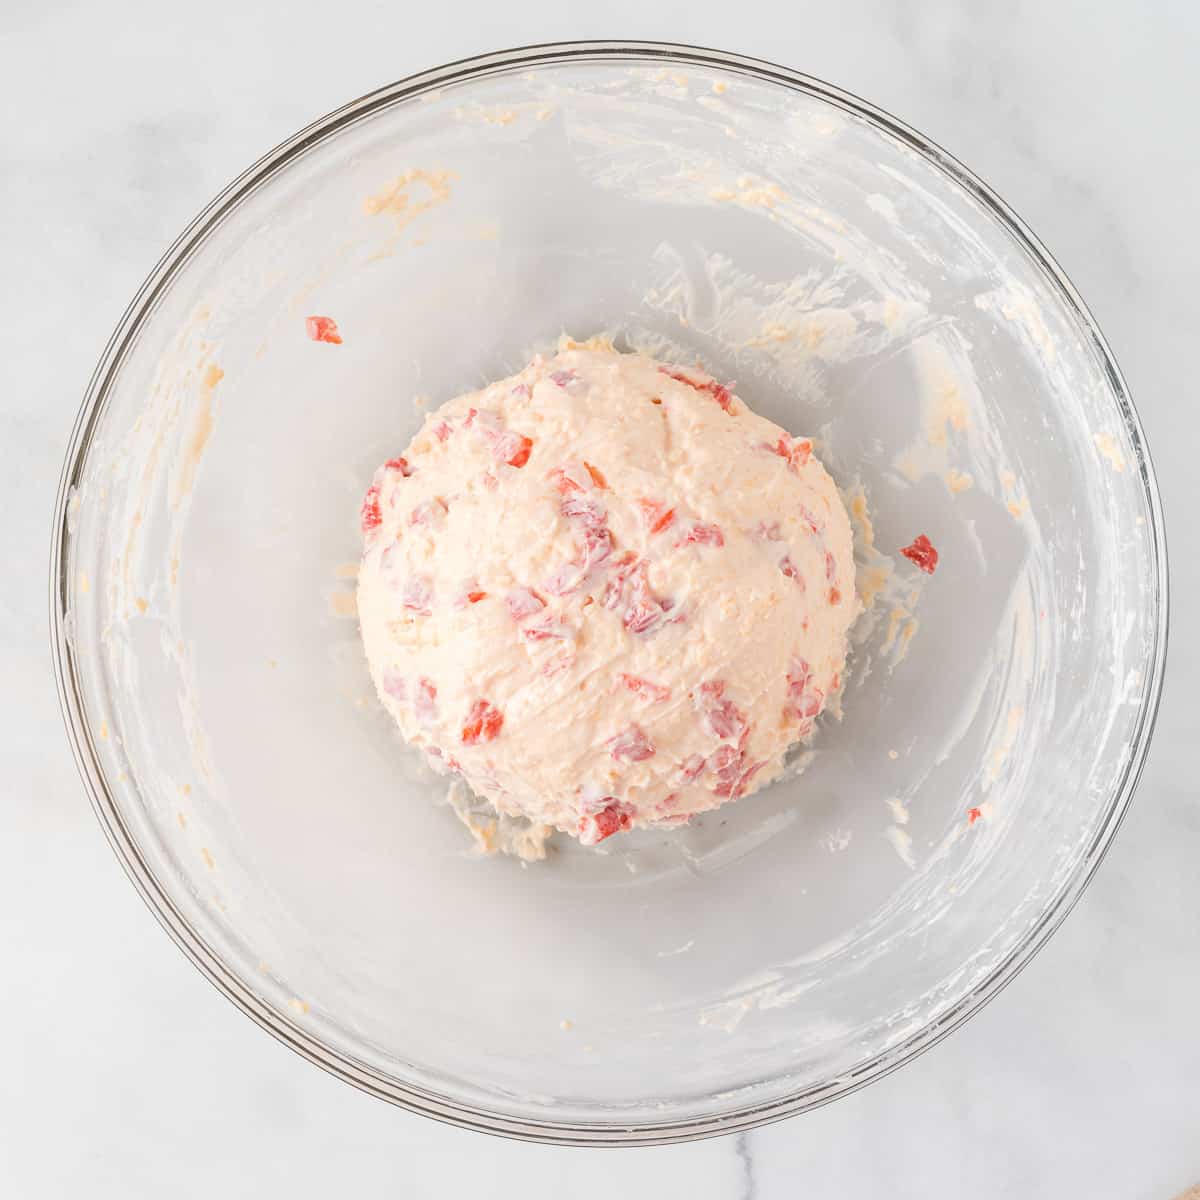 pimento cheese ball formed into a round shape